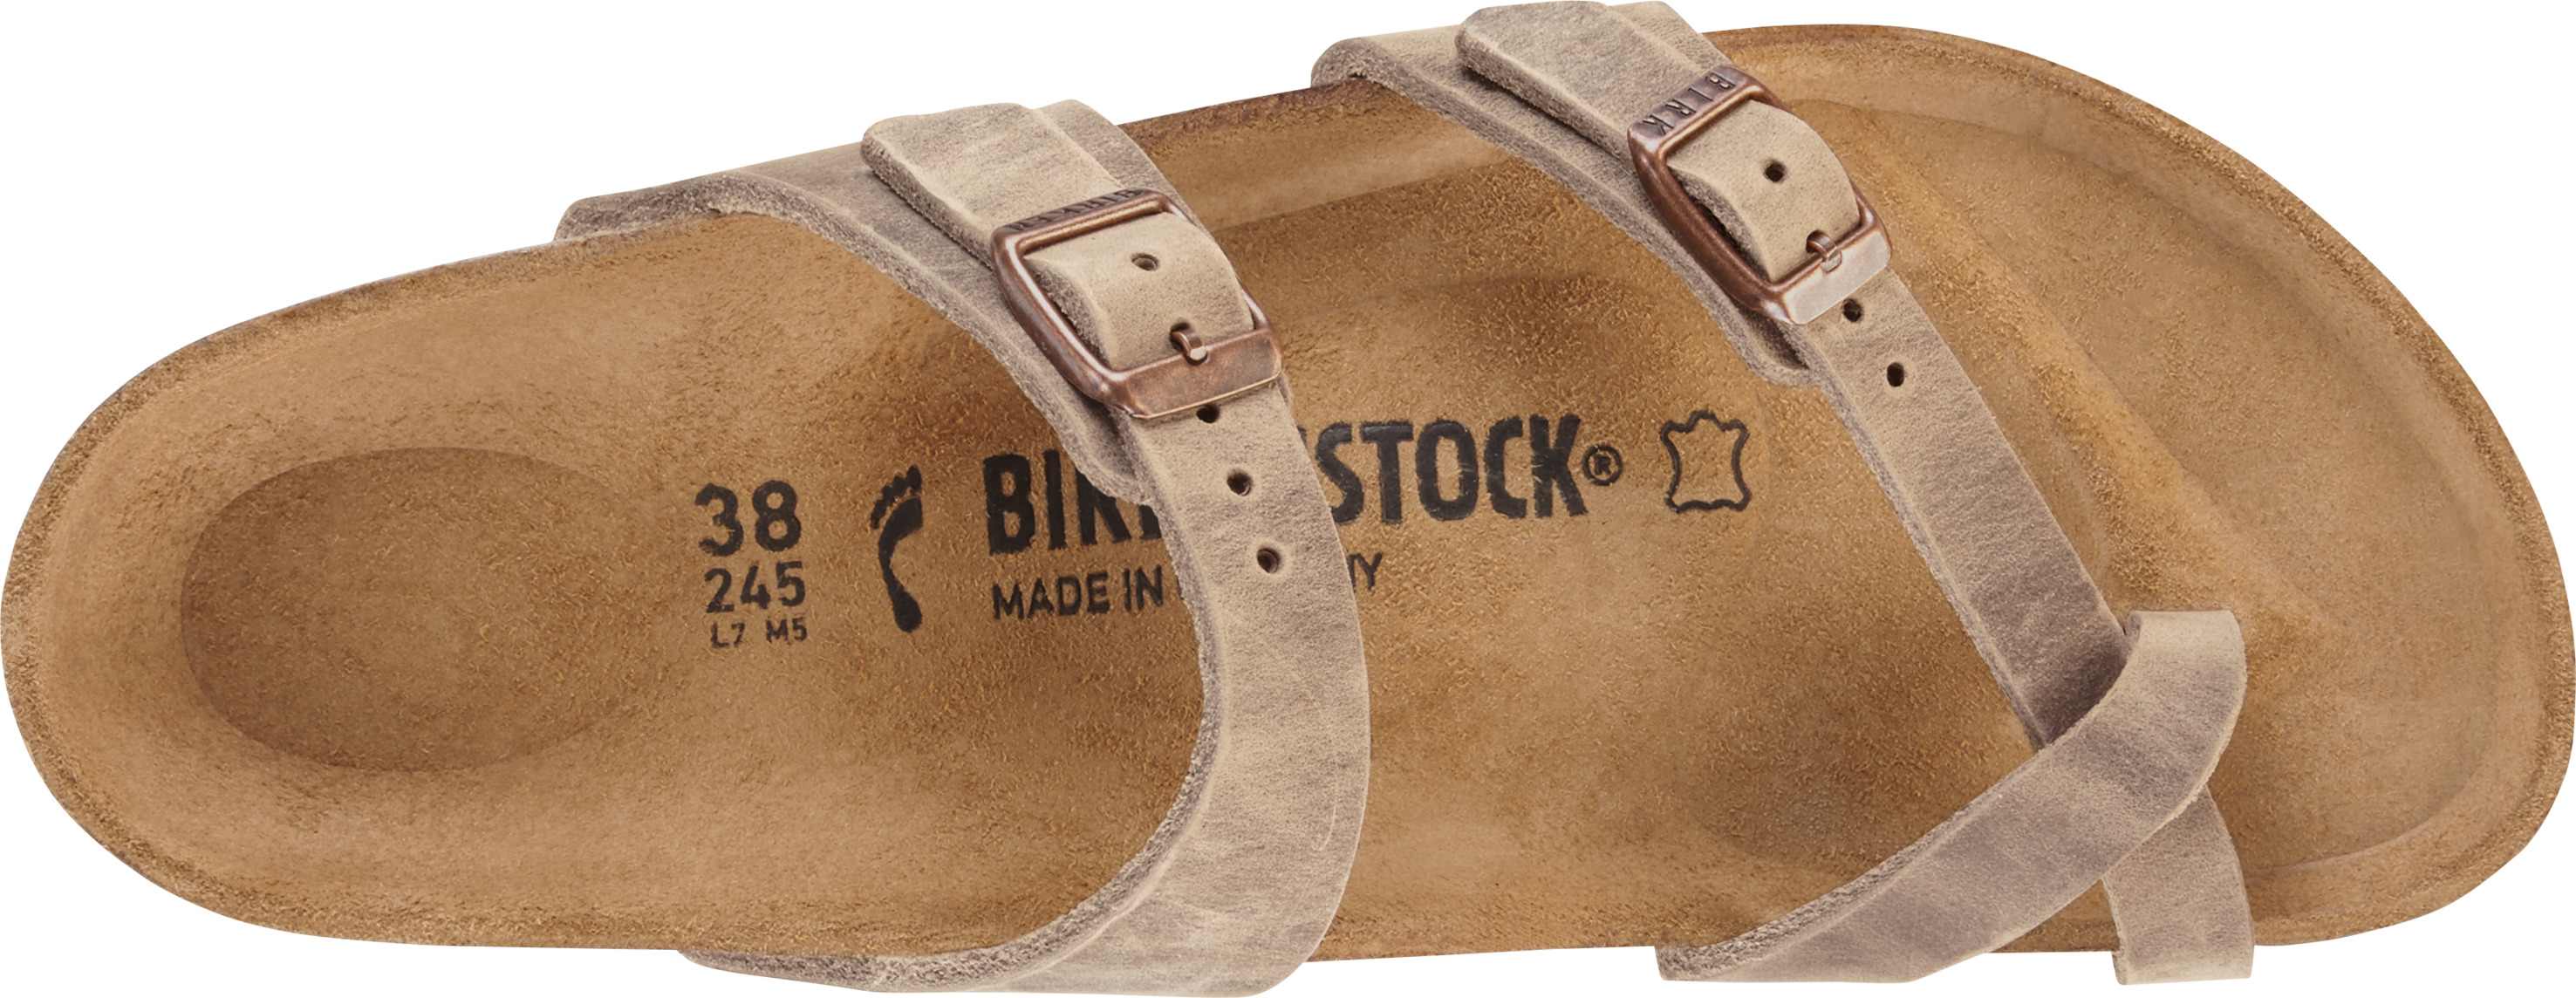 Birkenstock Mayari Oiled Ladies Tobacco Brown Leather Arch Support Buckle Sandals